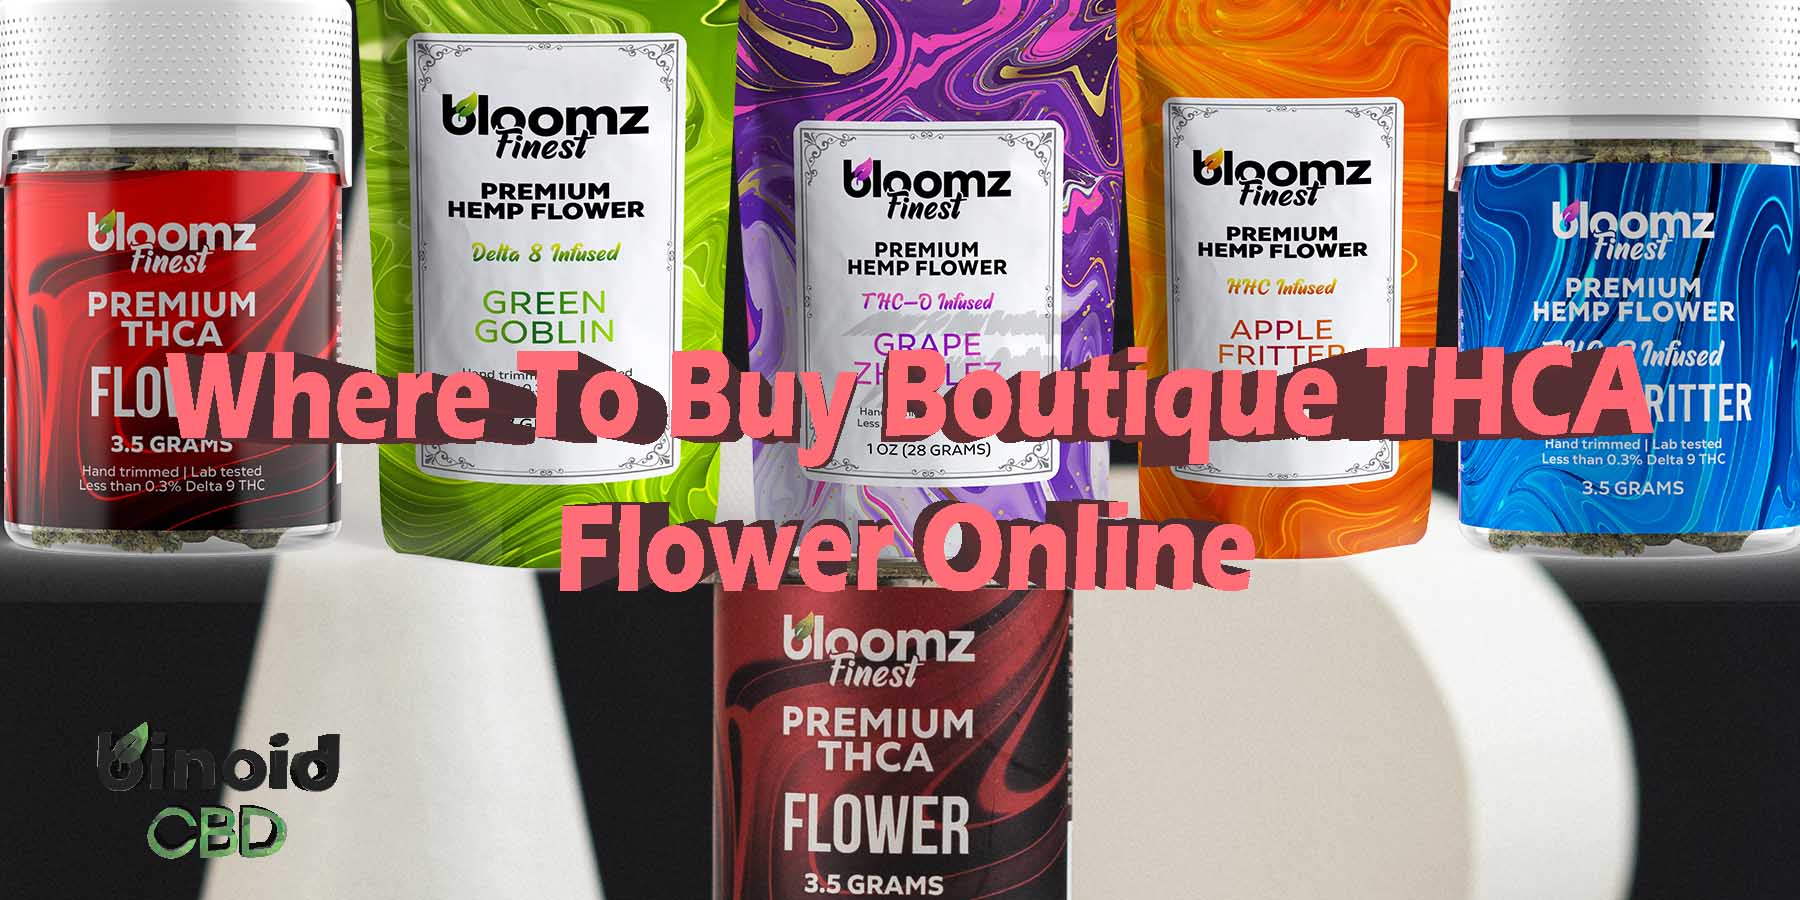 Where To Buy Boutique THCA Flower Online WhereToGet HowToGetNearMe BestPlace LowestPrice Coupon Discount StrongestBrand BestBrand Binoid